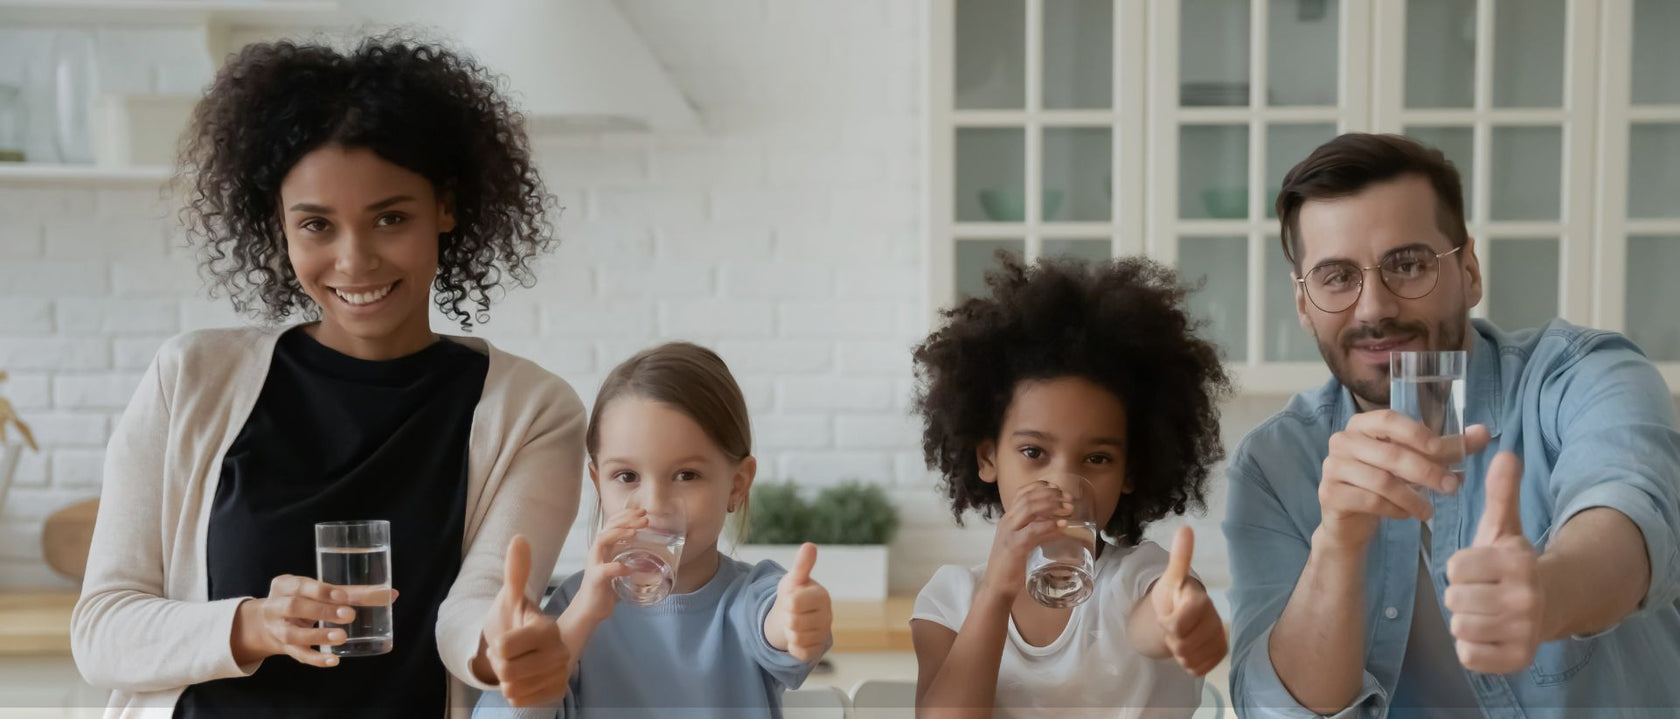 Interracial_family_drinking_water_and_giving_the_thumbs_up_